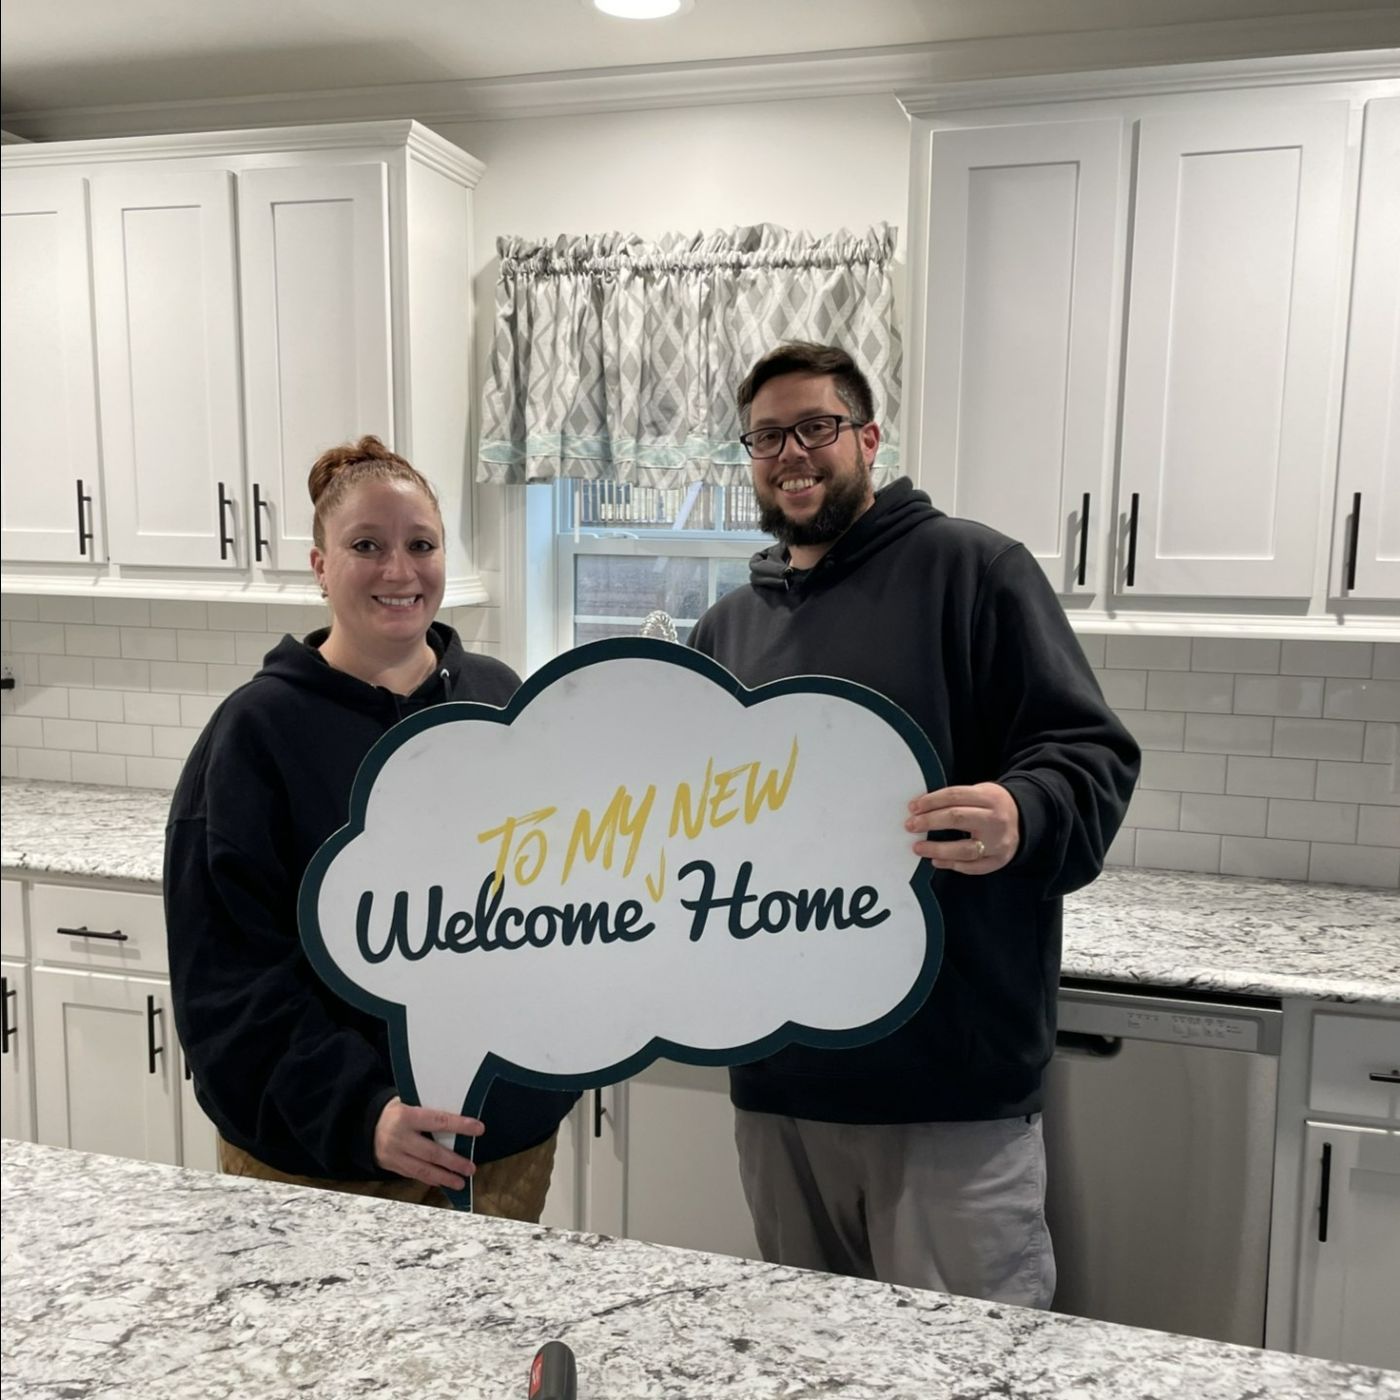 ANGELINA L. welcome home image